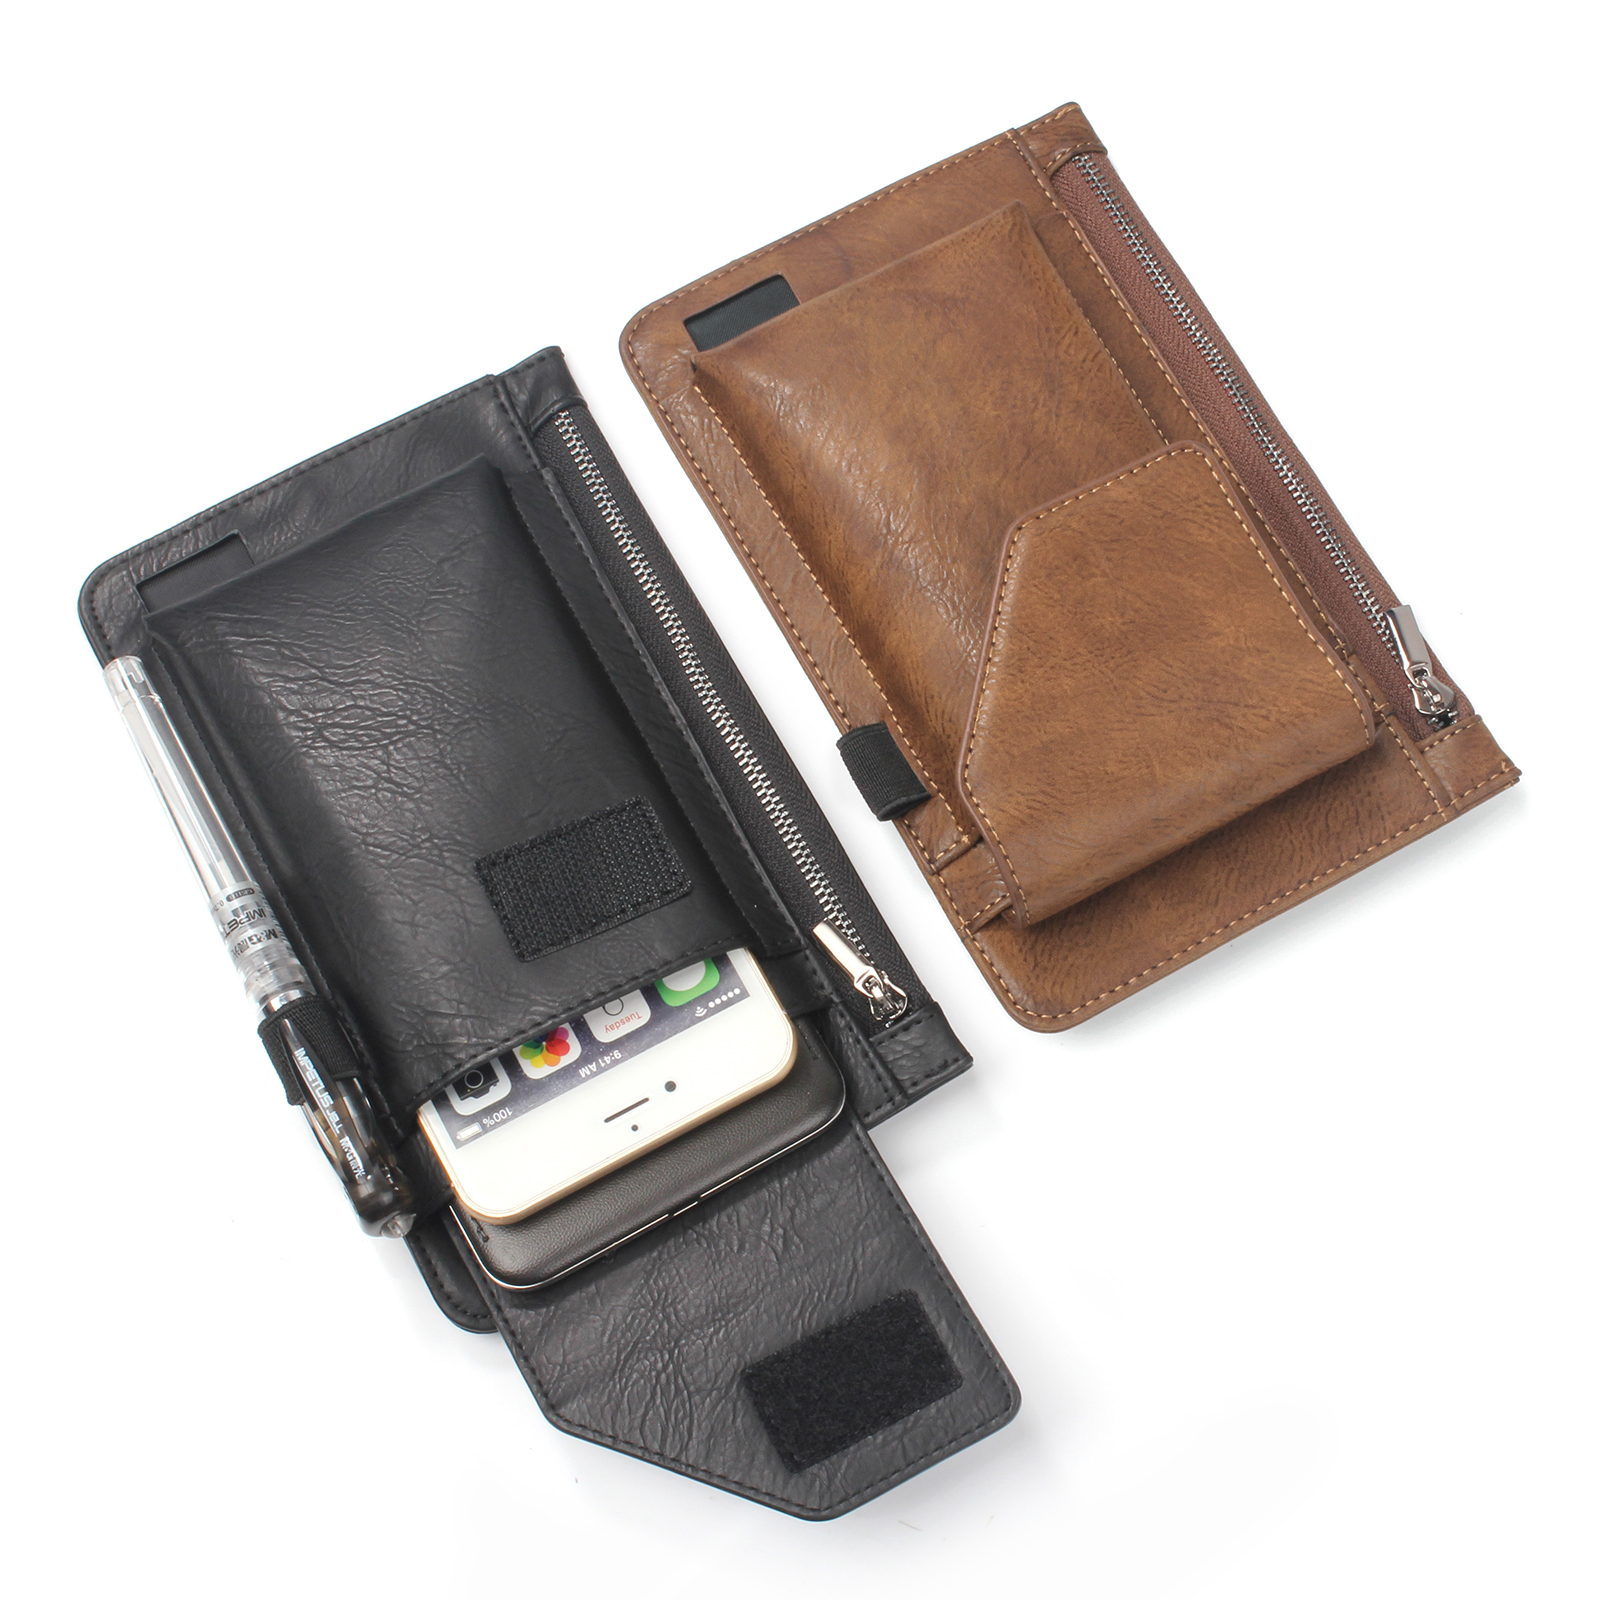 Bakeey-Casual-Vintage-Bussiness-Multi-Pocket-Reserve-Charging-Port-PU-Leather-Mobile-Phone-Money-Hik-1692248-17